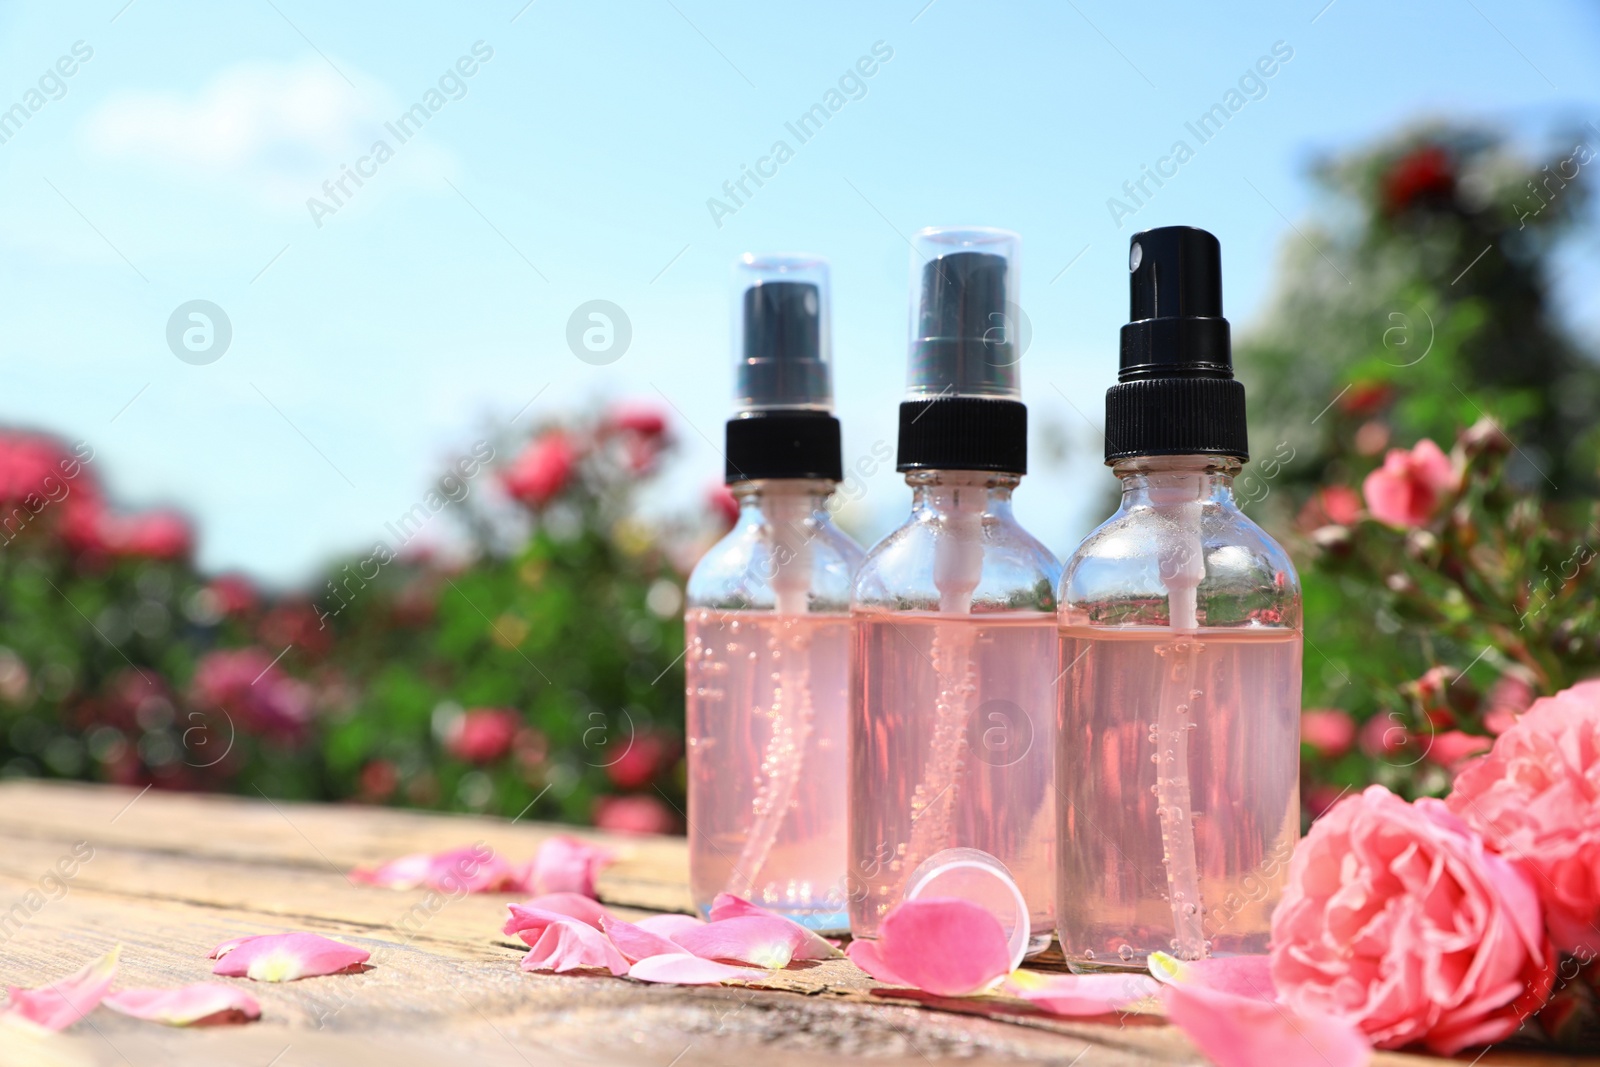 Photo of Bottles of facial toner with essential oil and fresh roses on wooden table against blurred background. Space for text